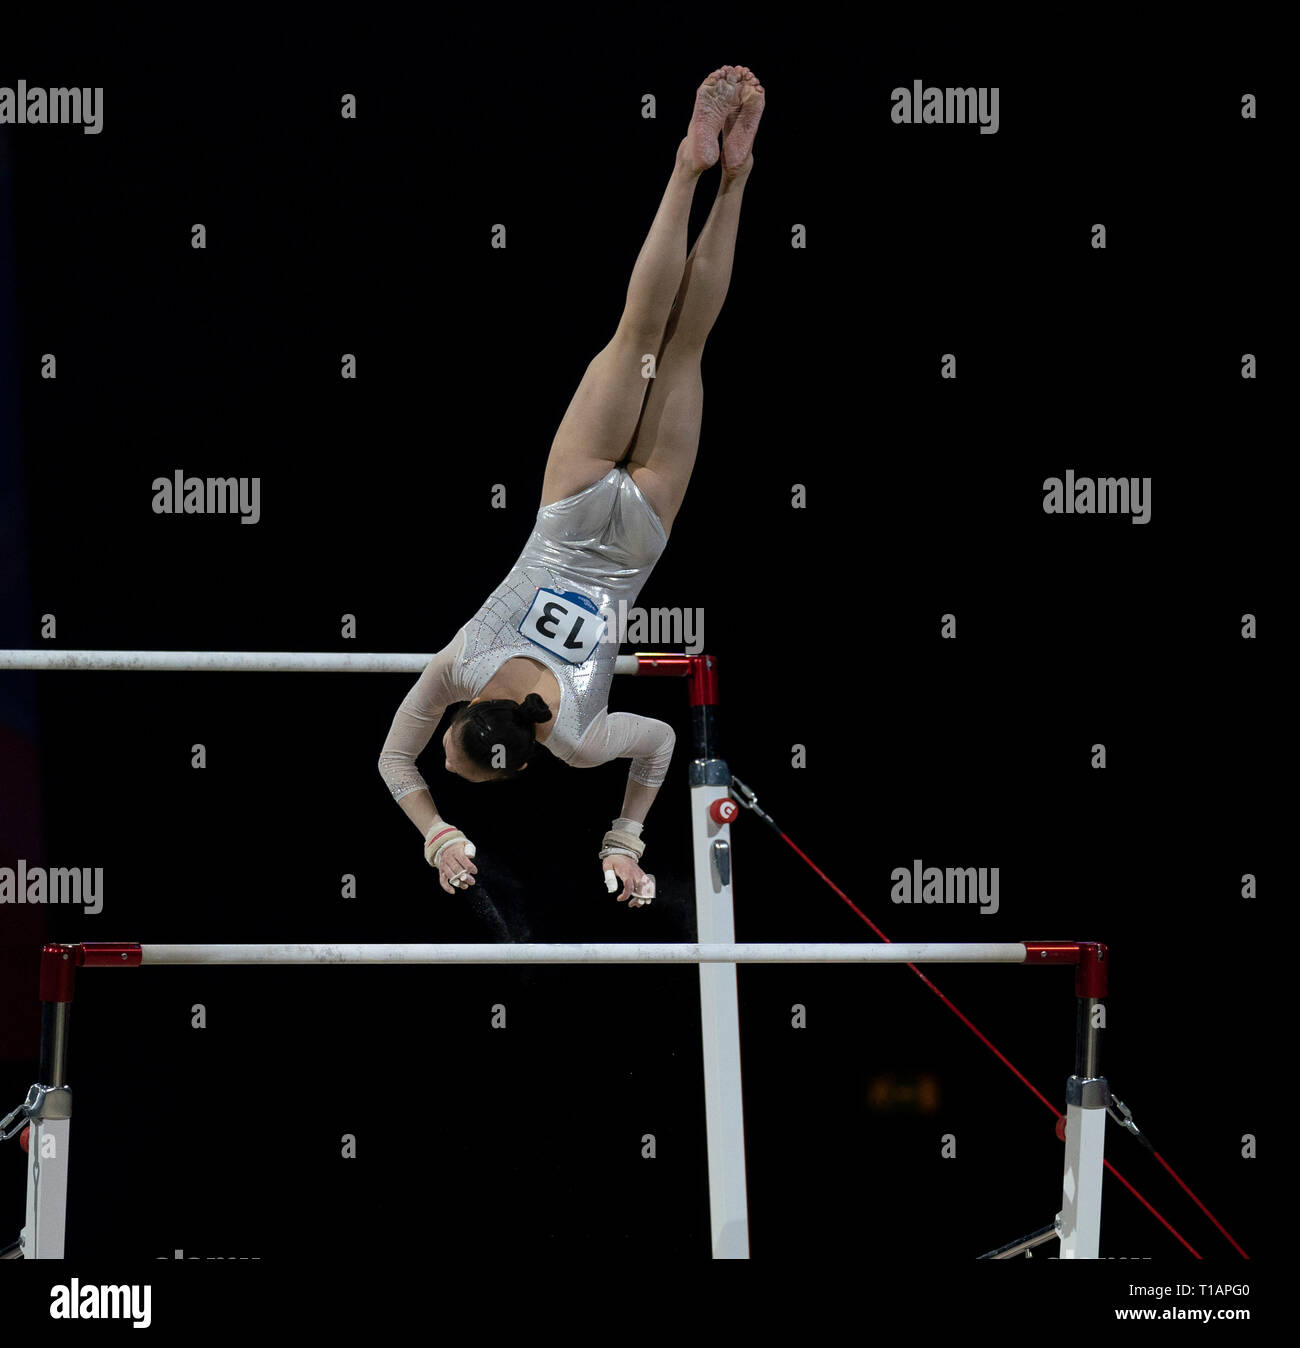 Jieyu Liu (China) seen in action during the Gymnastics World Cup 2019 at Genting Arena in Birmingham. Stock Photo